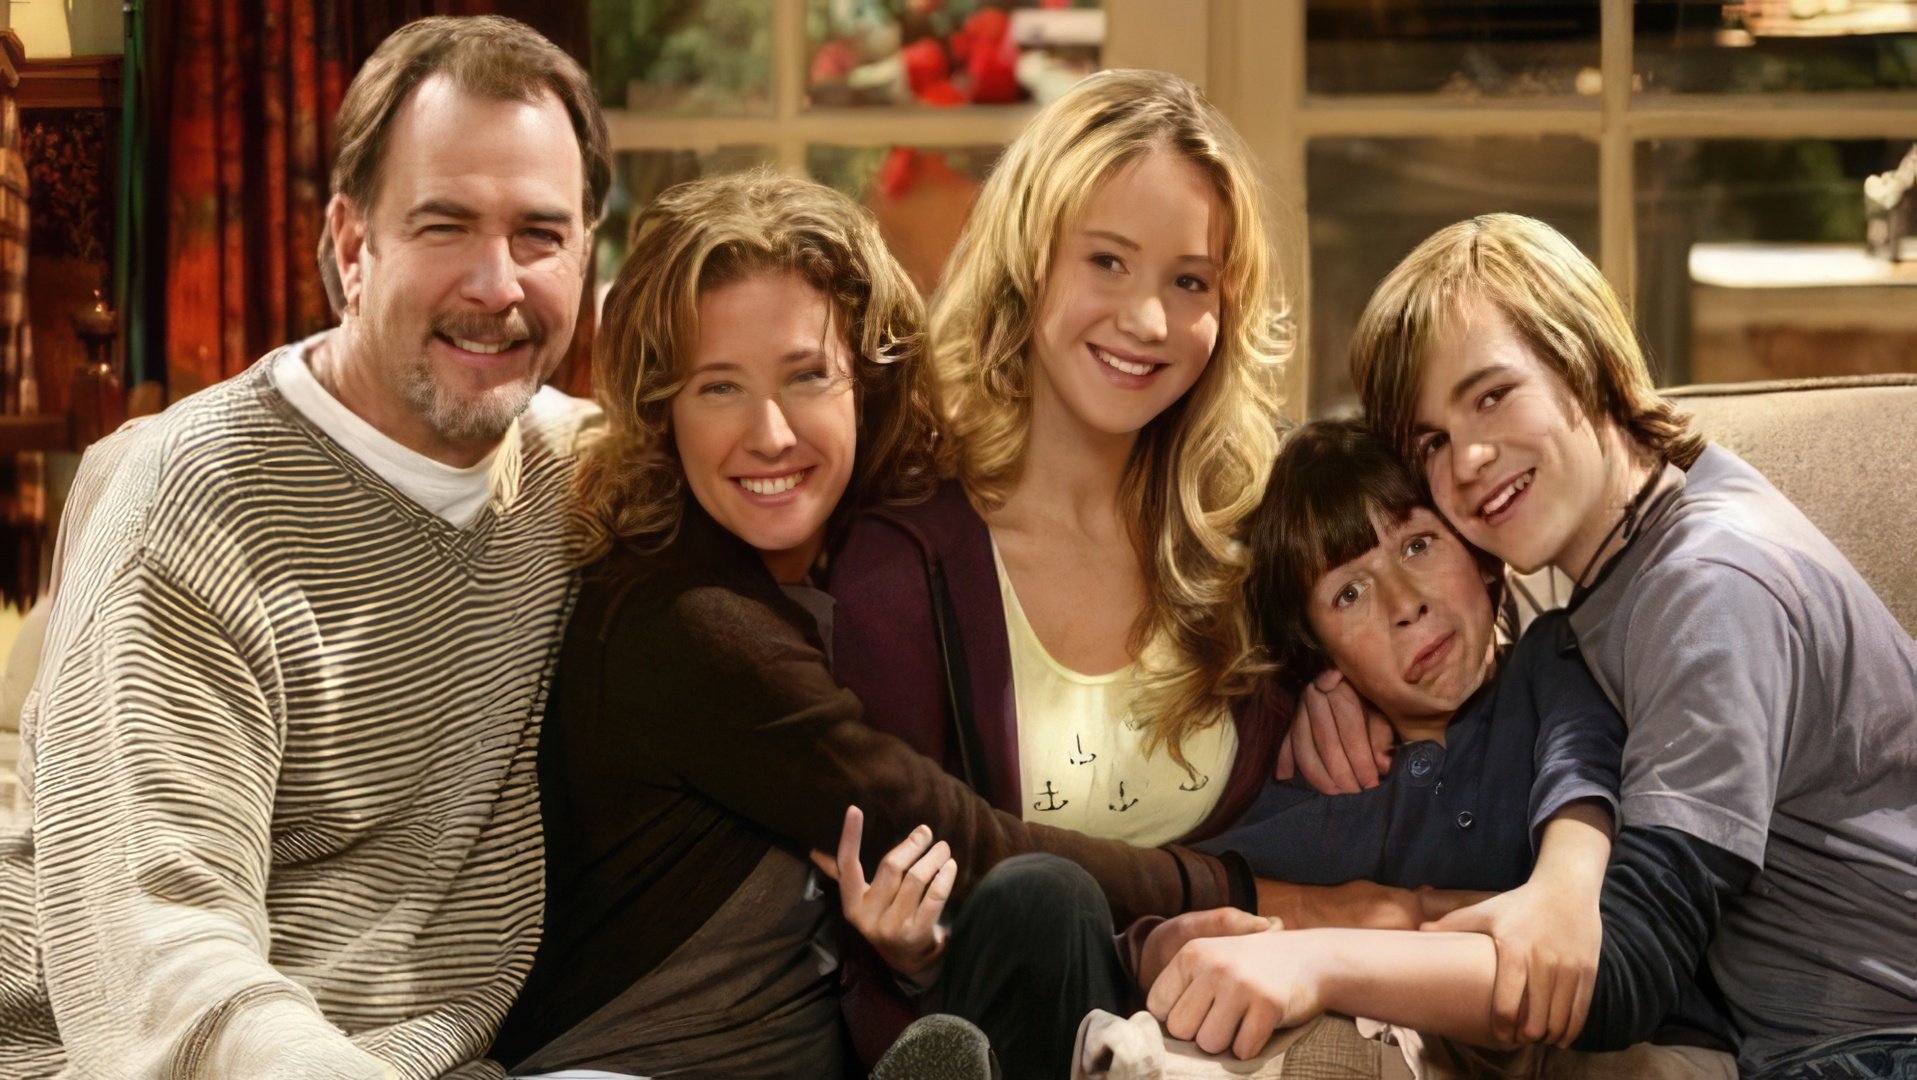 In 'The Bill Engvall Show', Jennifer Lawrence played the eldest daughter